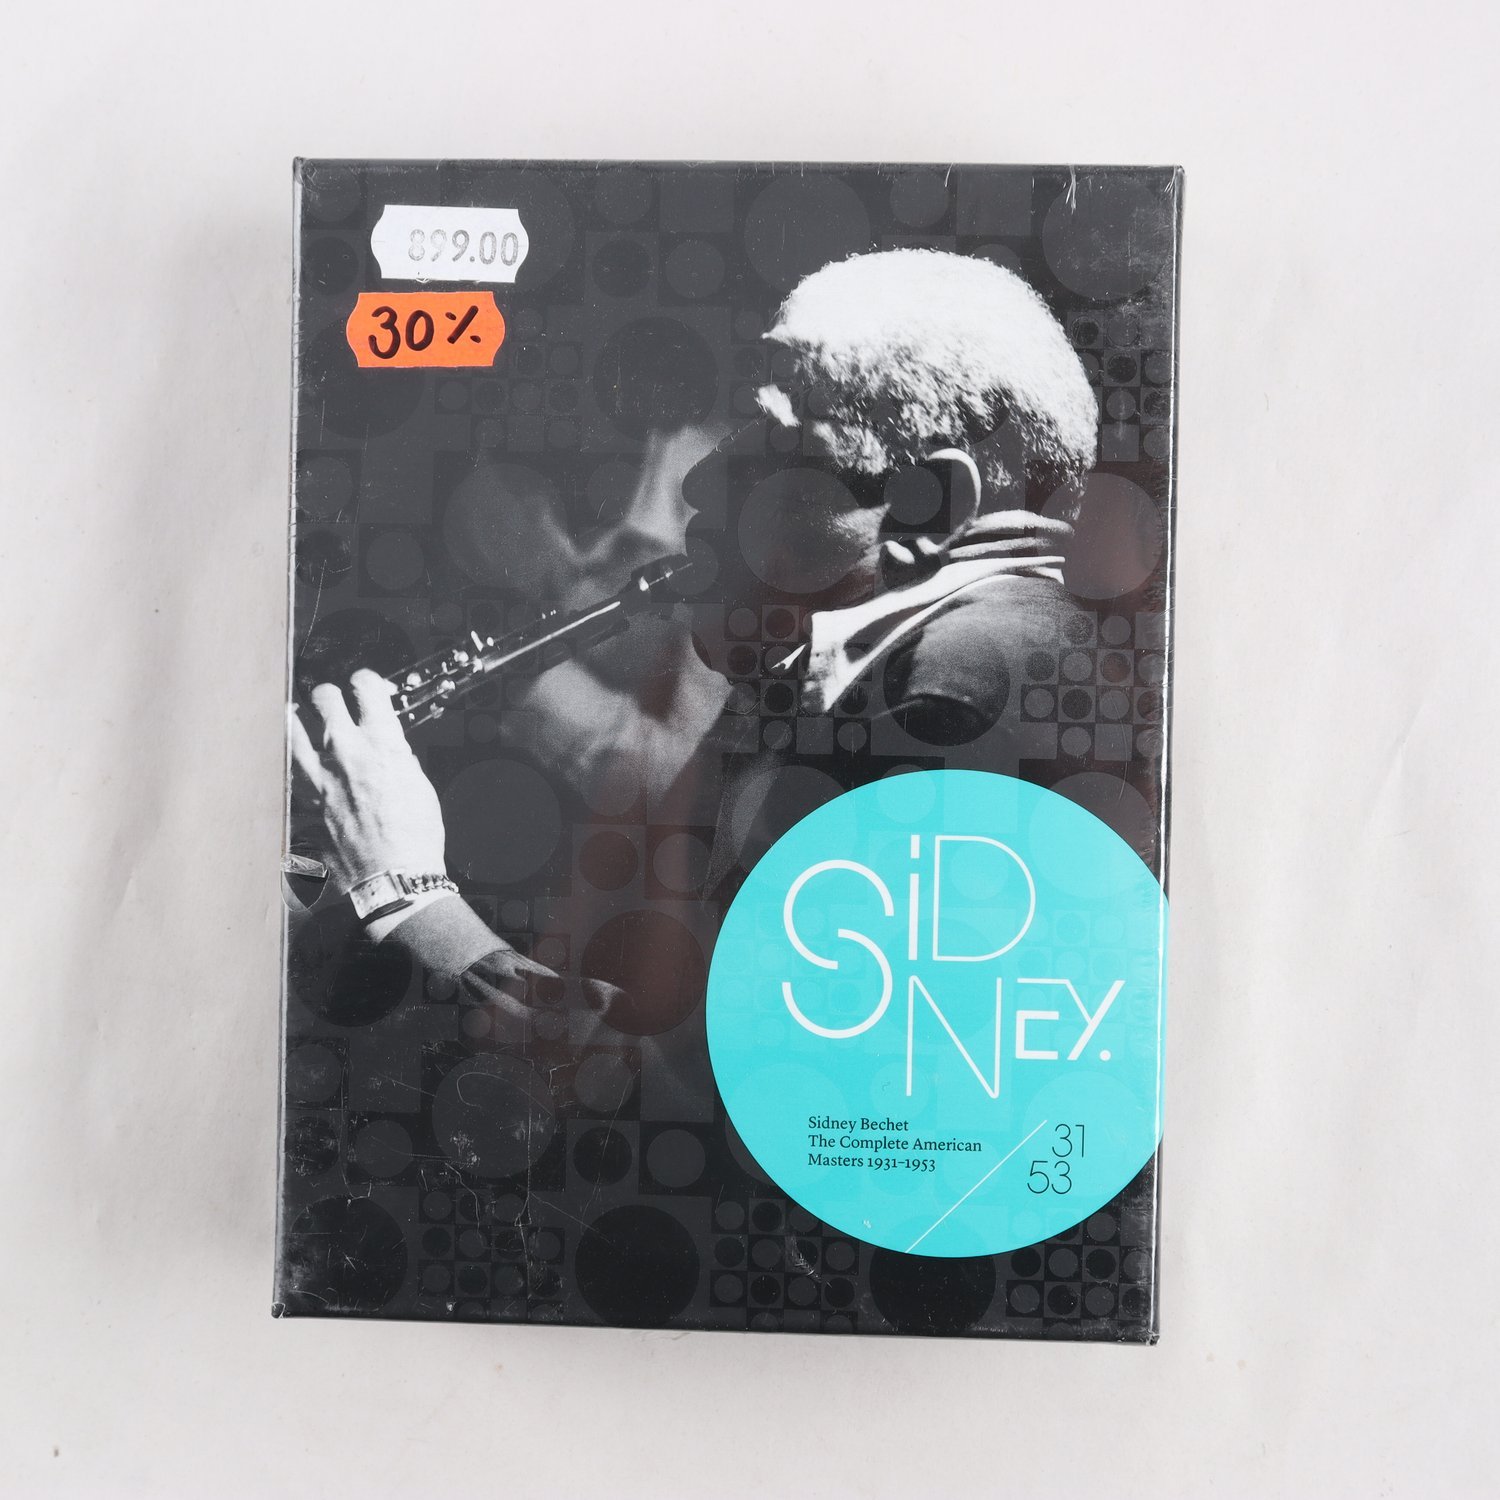 CD Sidney Bechet, The Complete American Masters 1931-1953